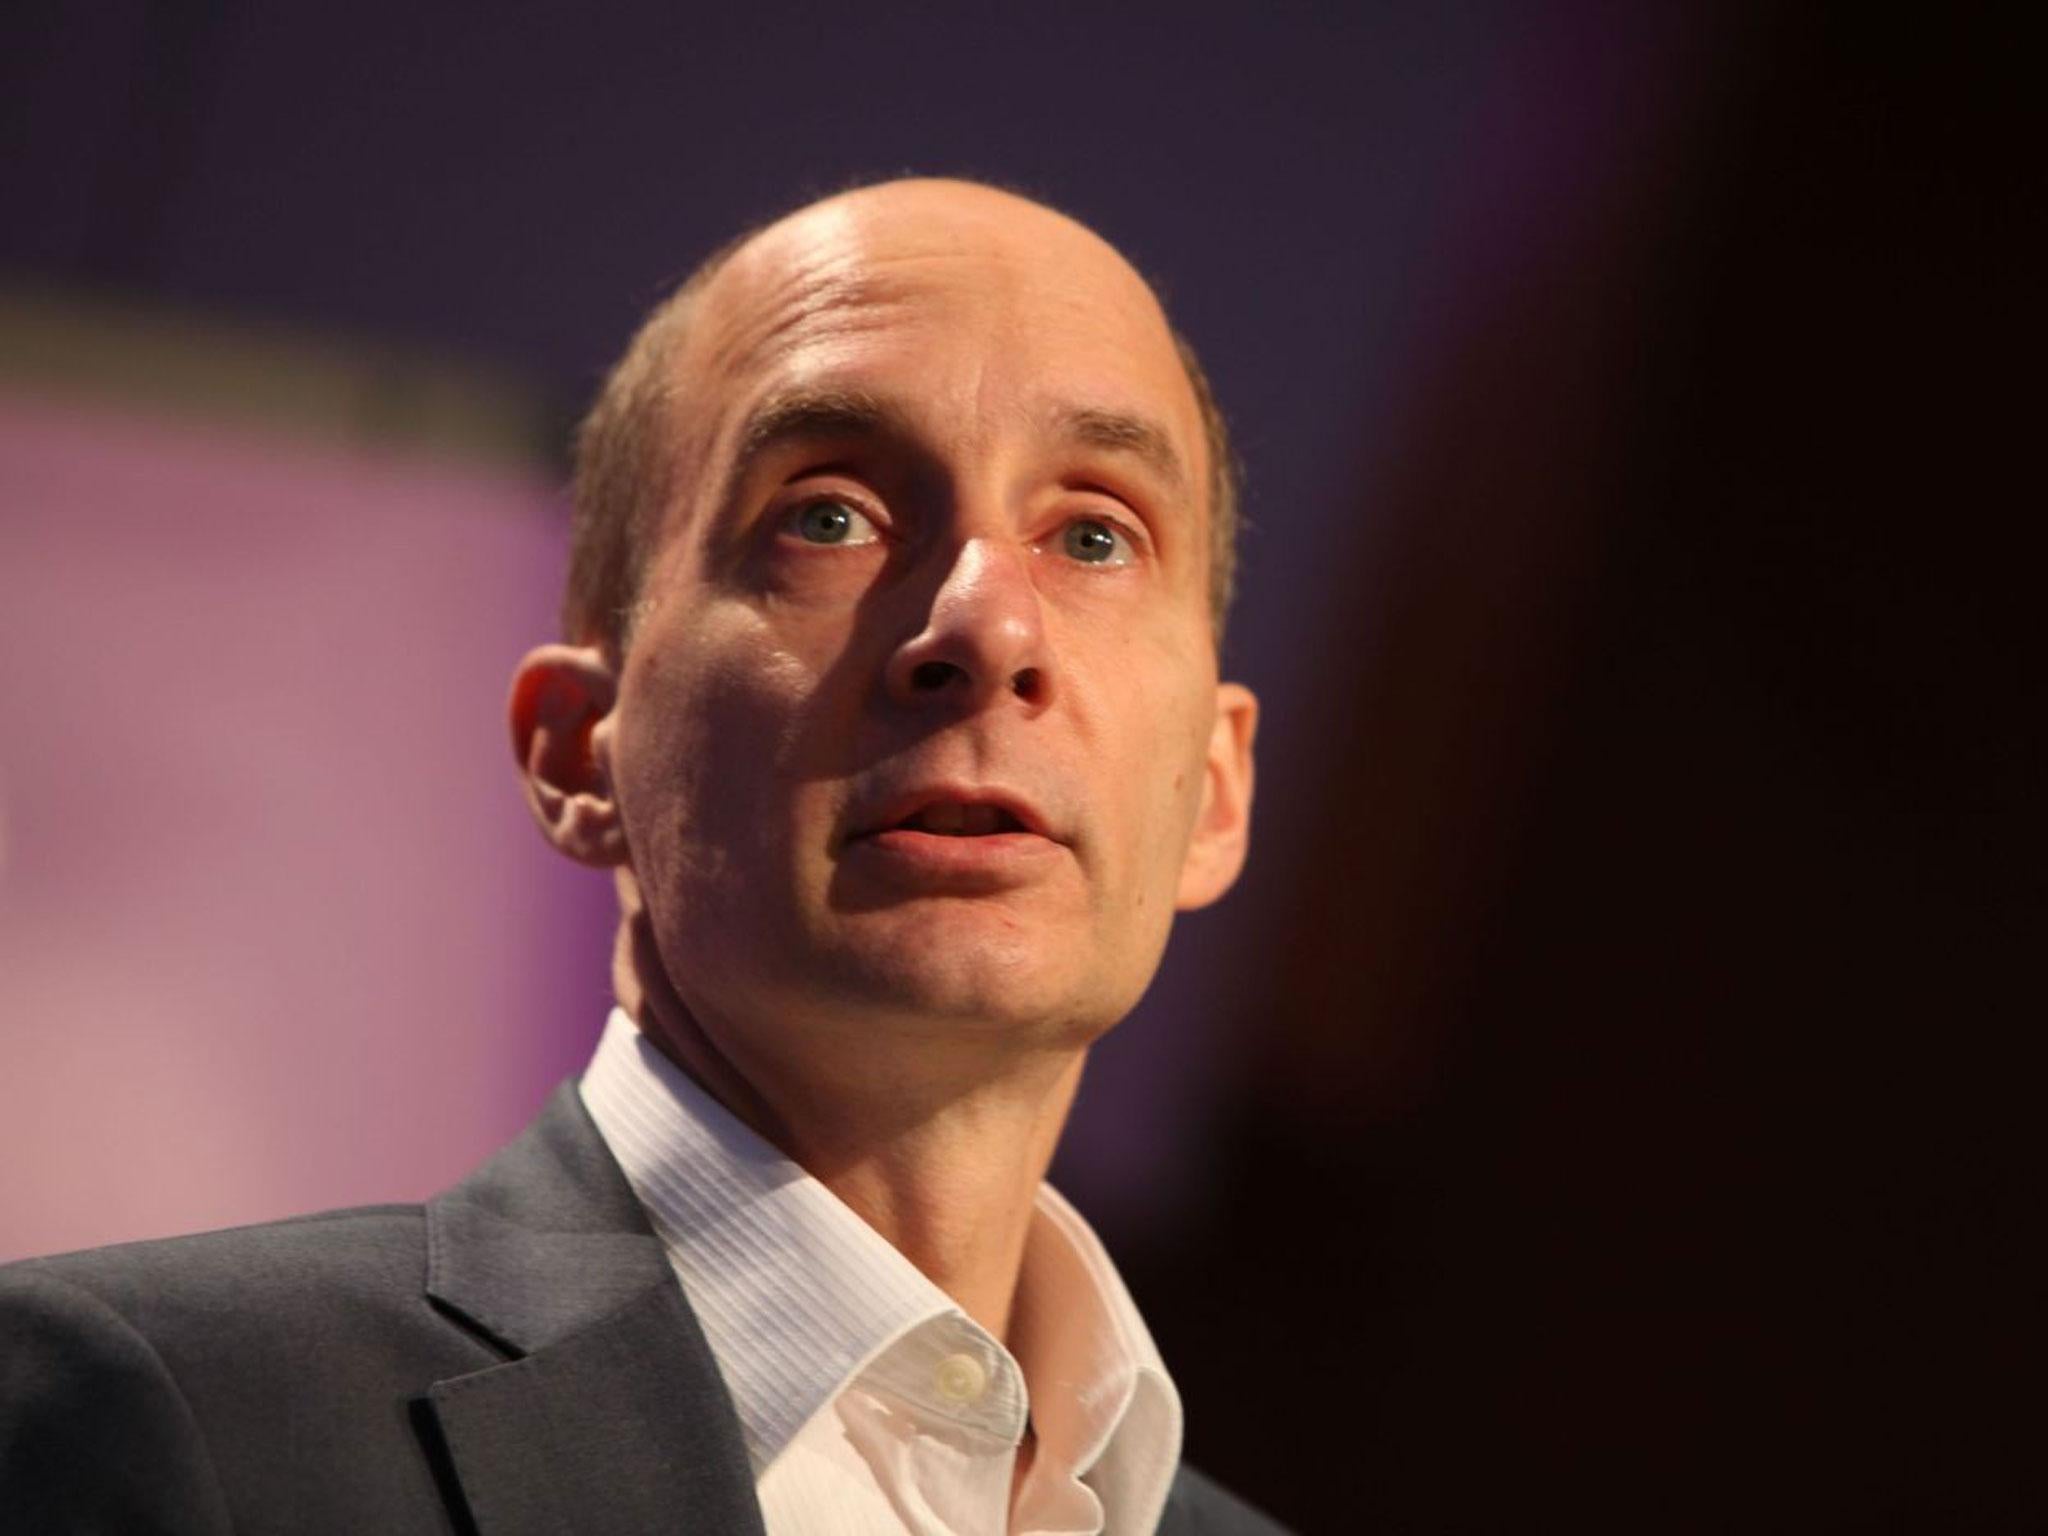 Lord Adonis said he felt ‘duty bound to oppose’ the EU (Withdrawal) Bill